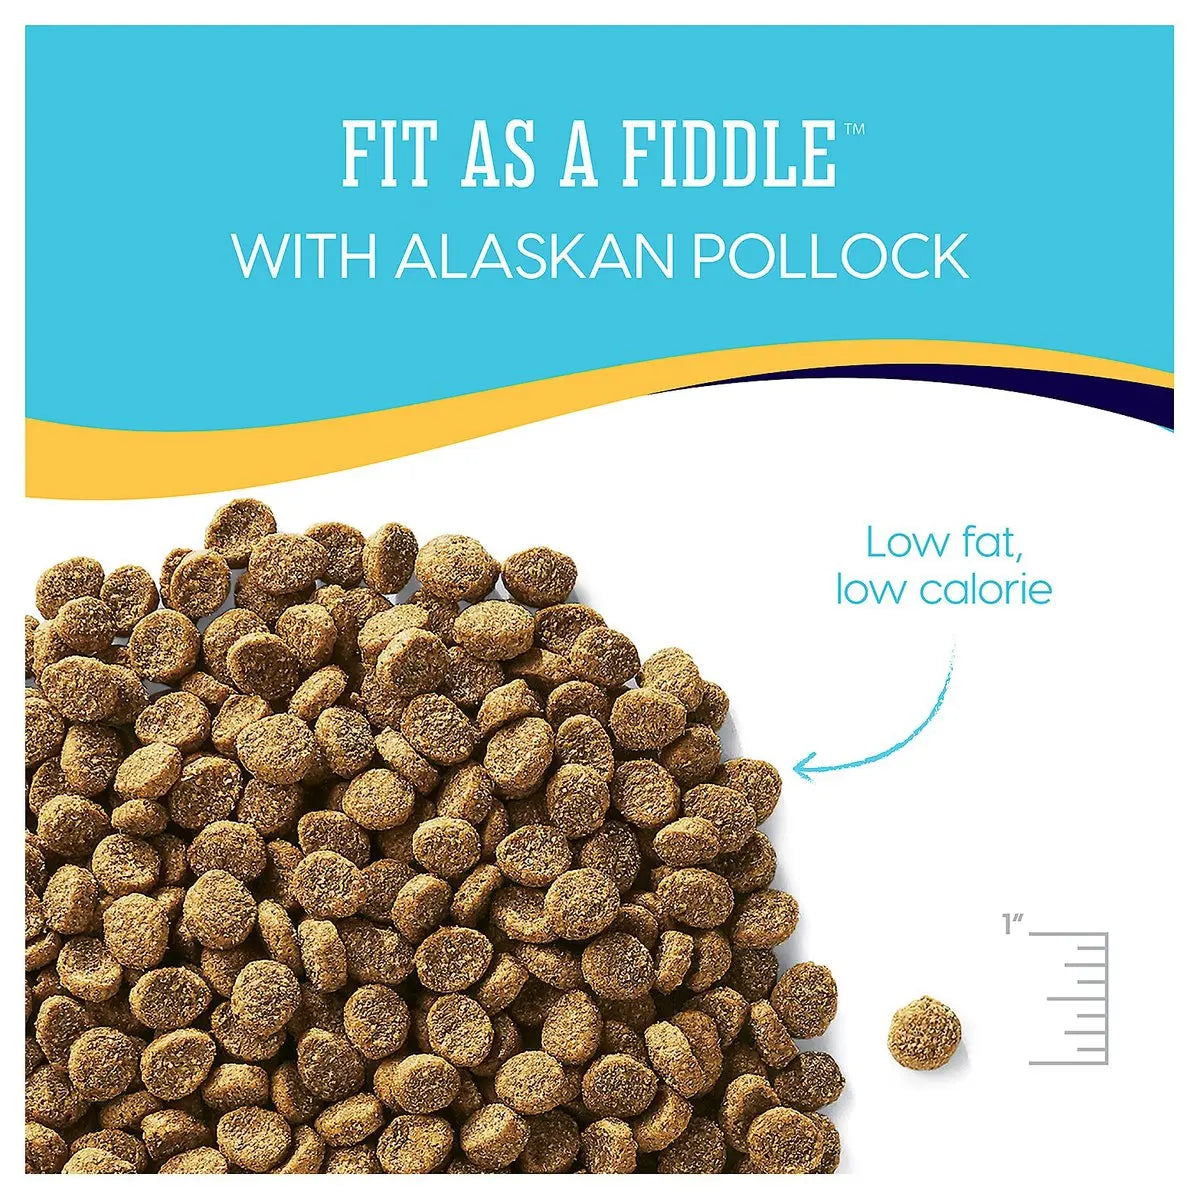 Solid Gold® Fit as a Fiddle Grain Free Fresh Caught Alaskan Pollock Weight Control Cat Food Solid Gold